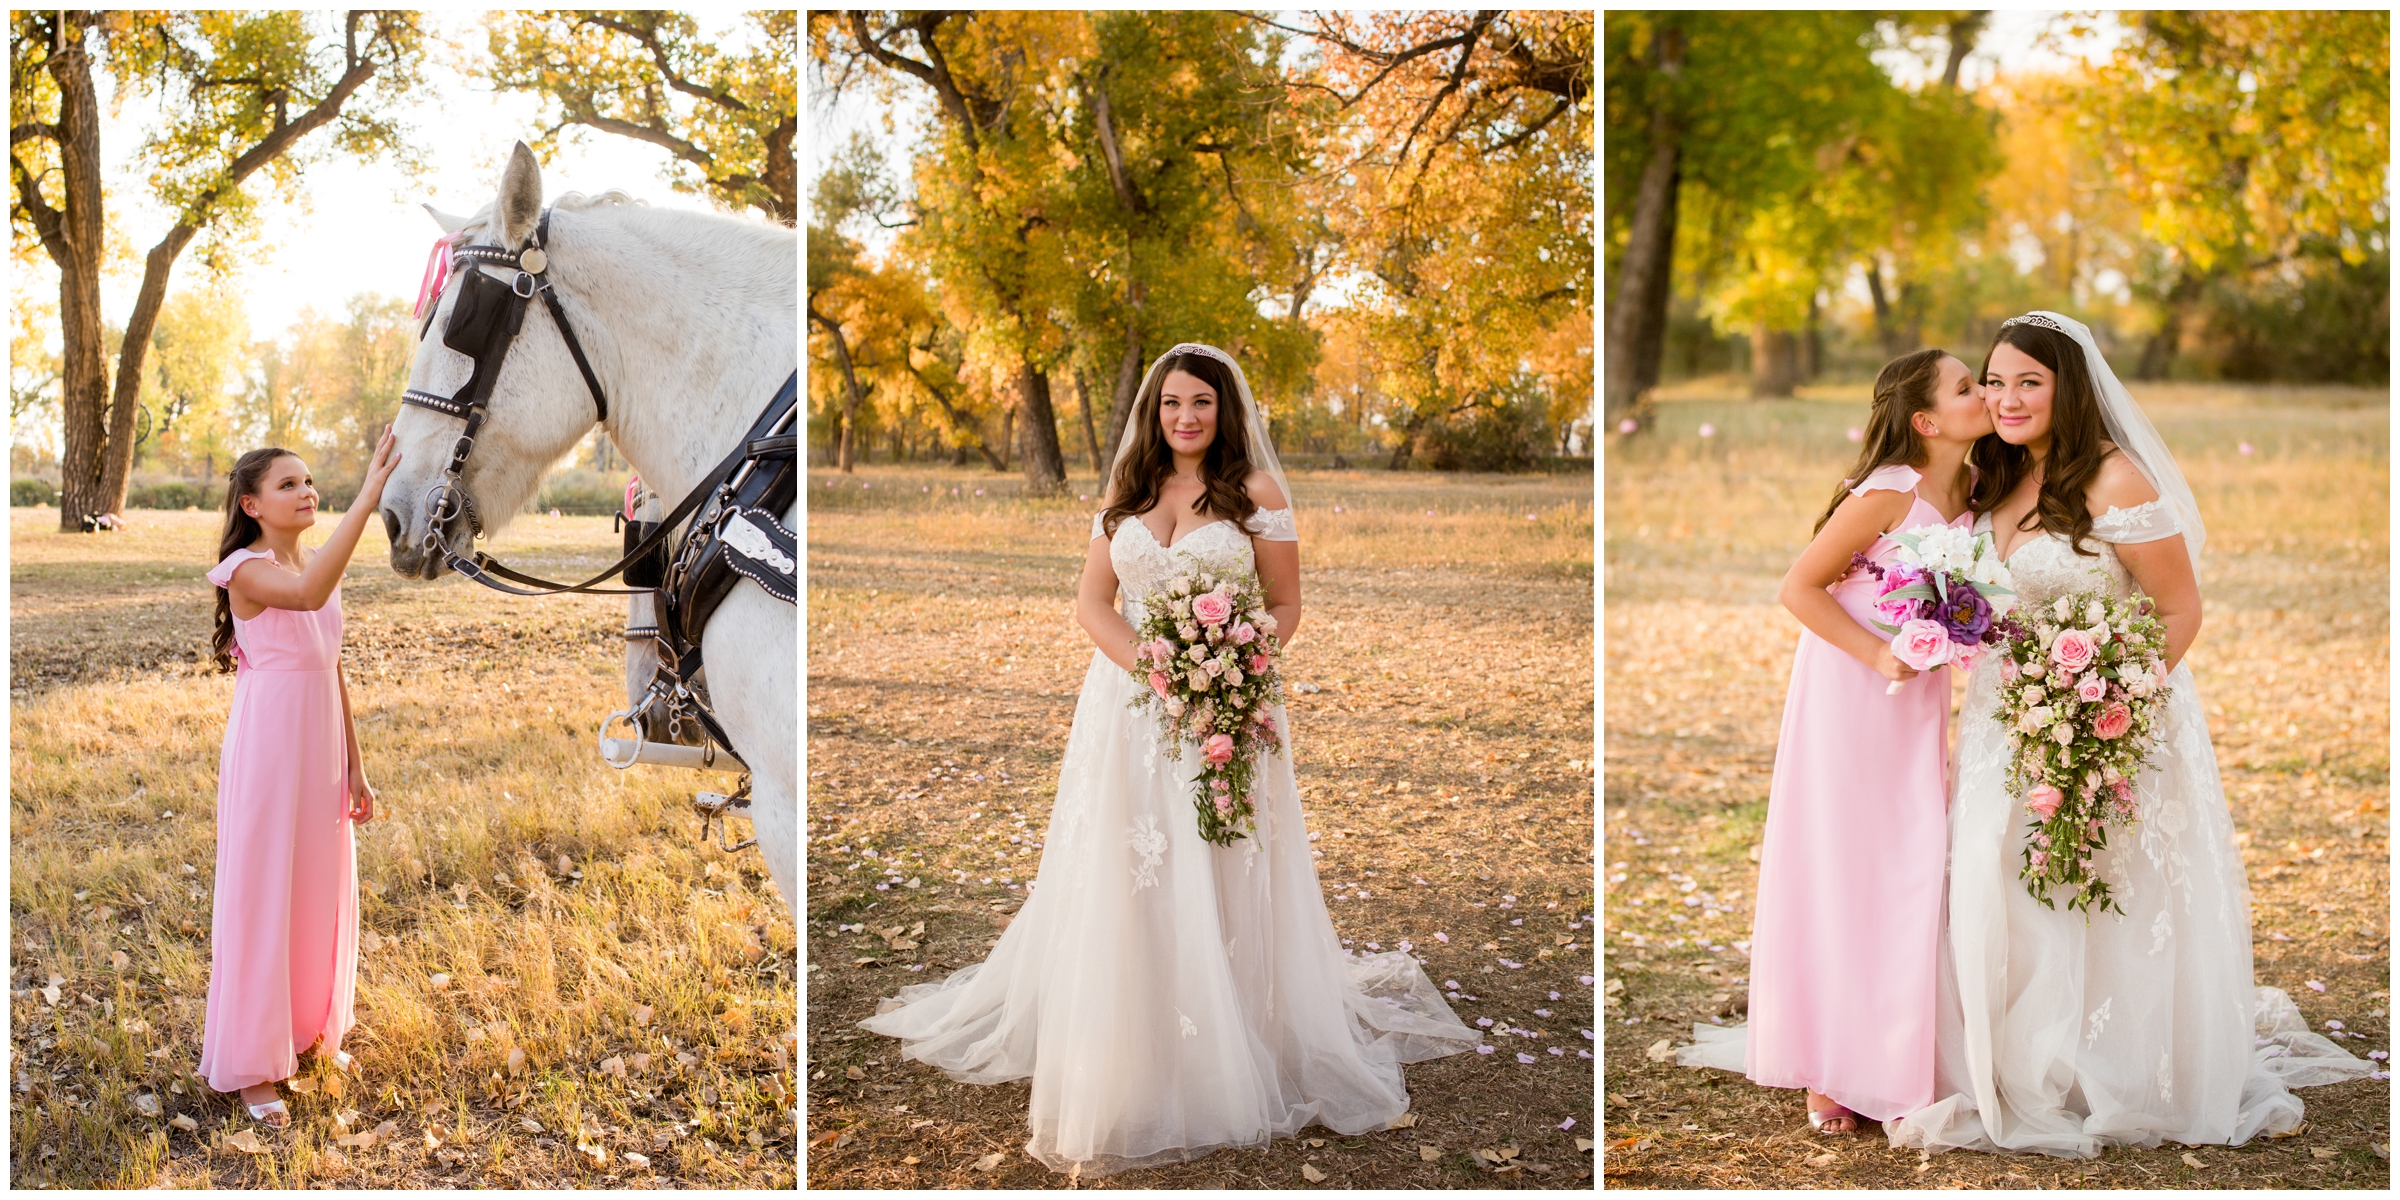 flower girl petting horse during rustic colorado wedding portraits 